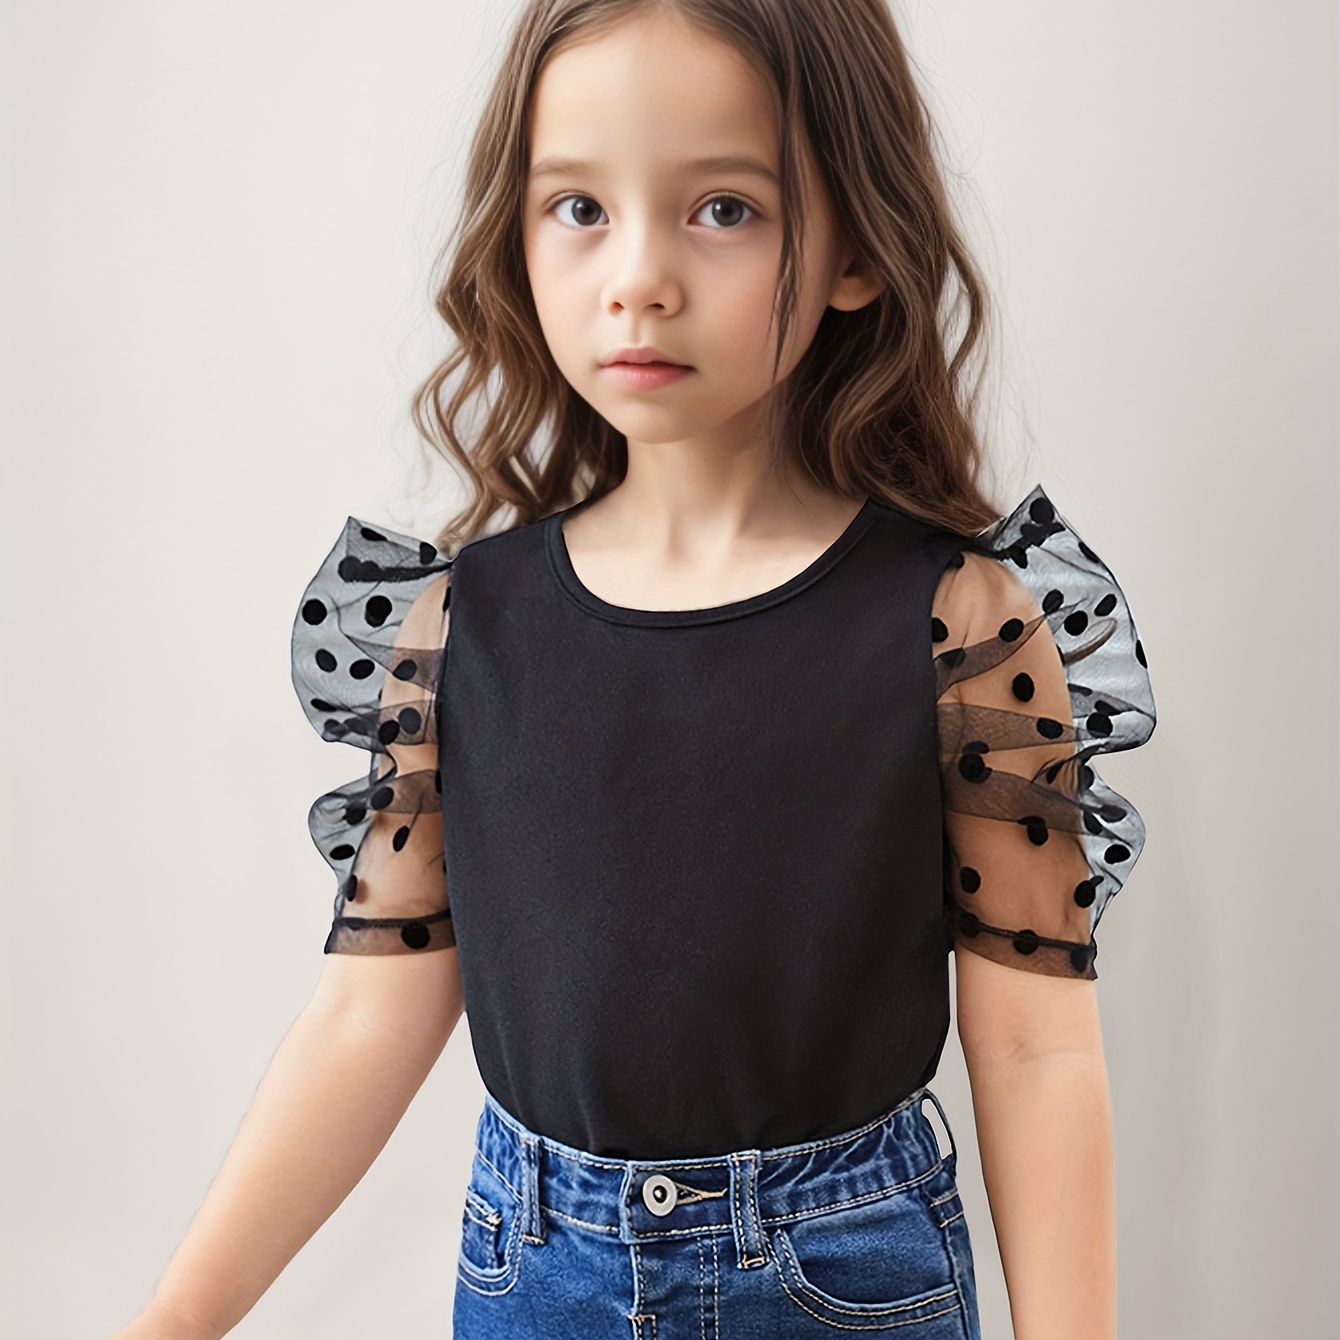 

Polka Dot Design Puff Mesh Sleeve T-shirt, Girls Casual Tees For Summer Party Gift